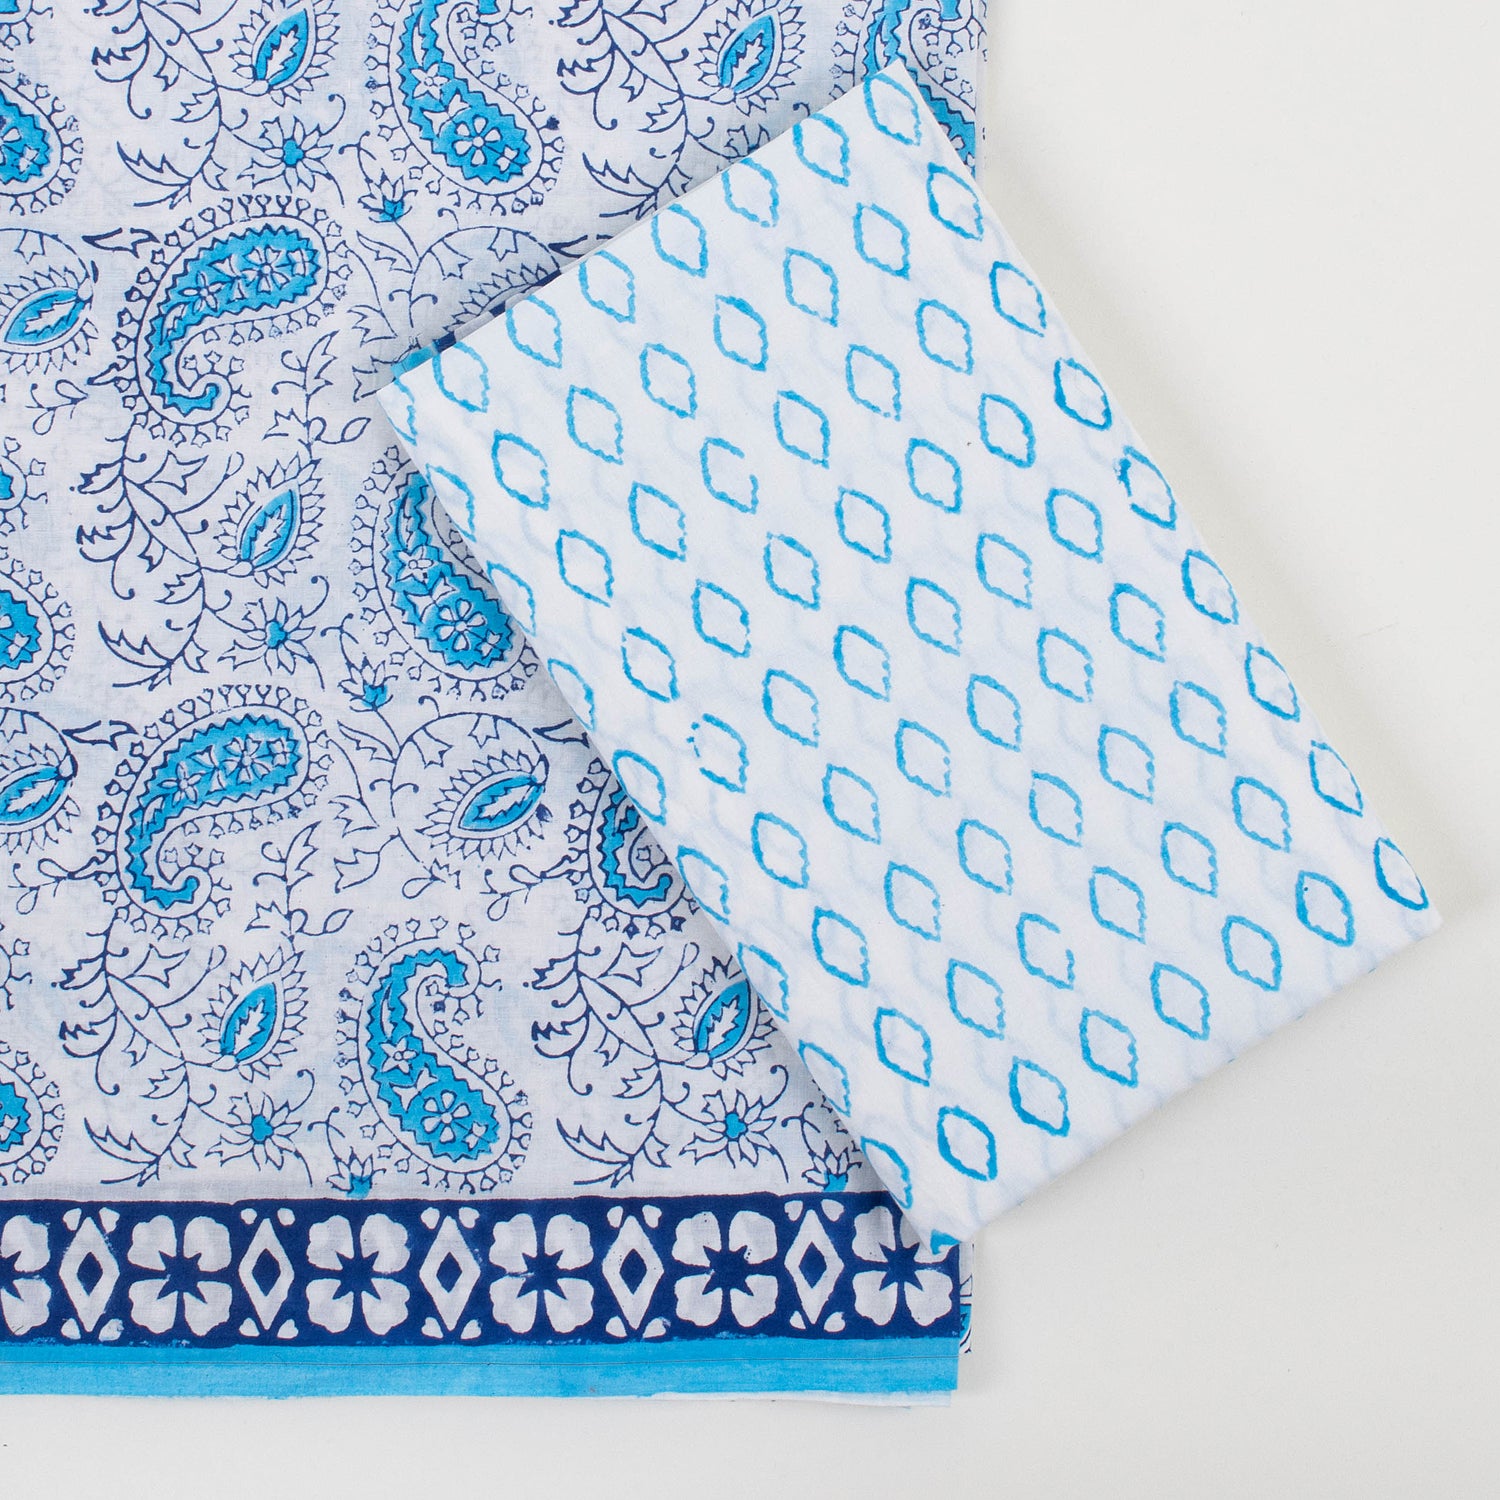 Sky Blue Paisley Hand Block Printed Cotton Suits for Women